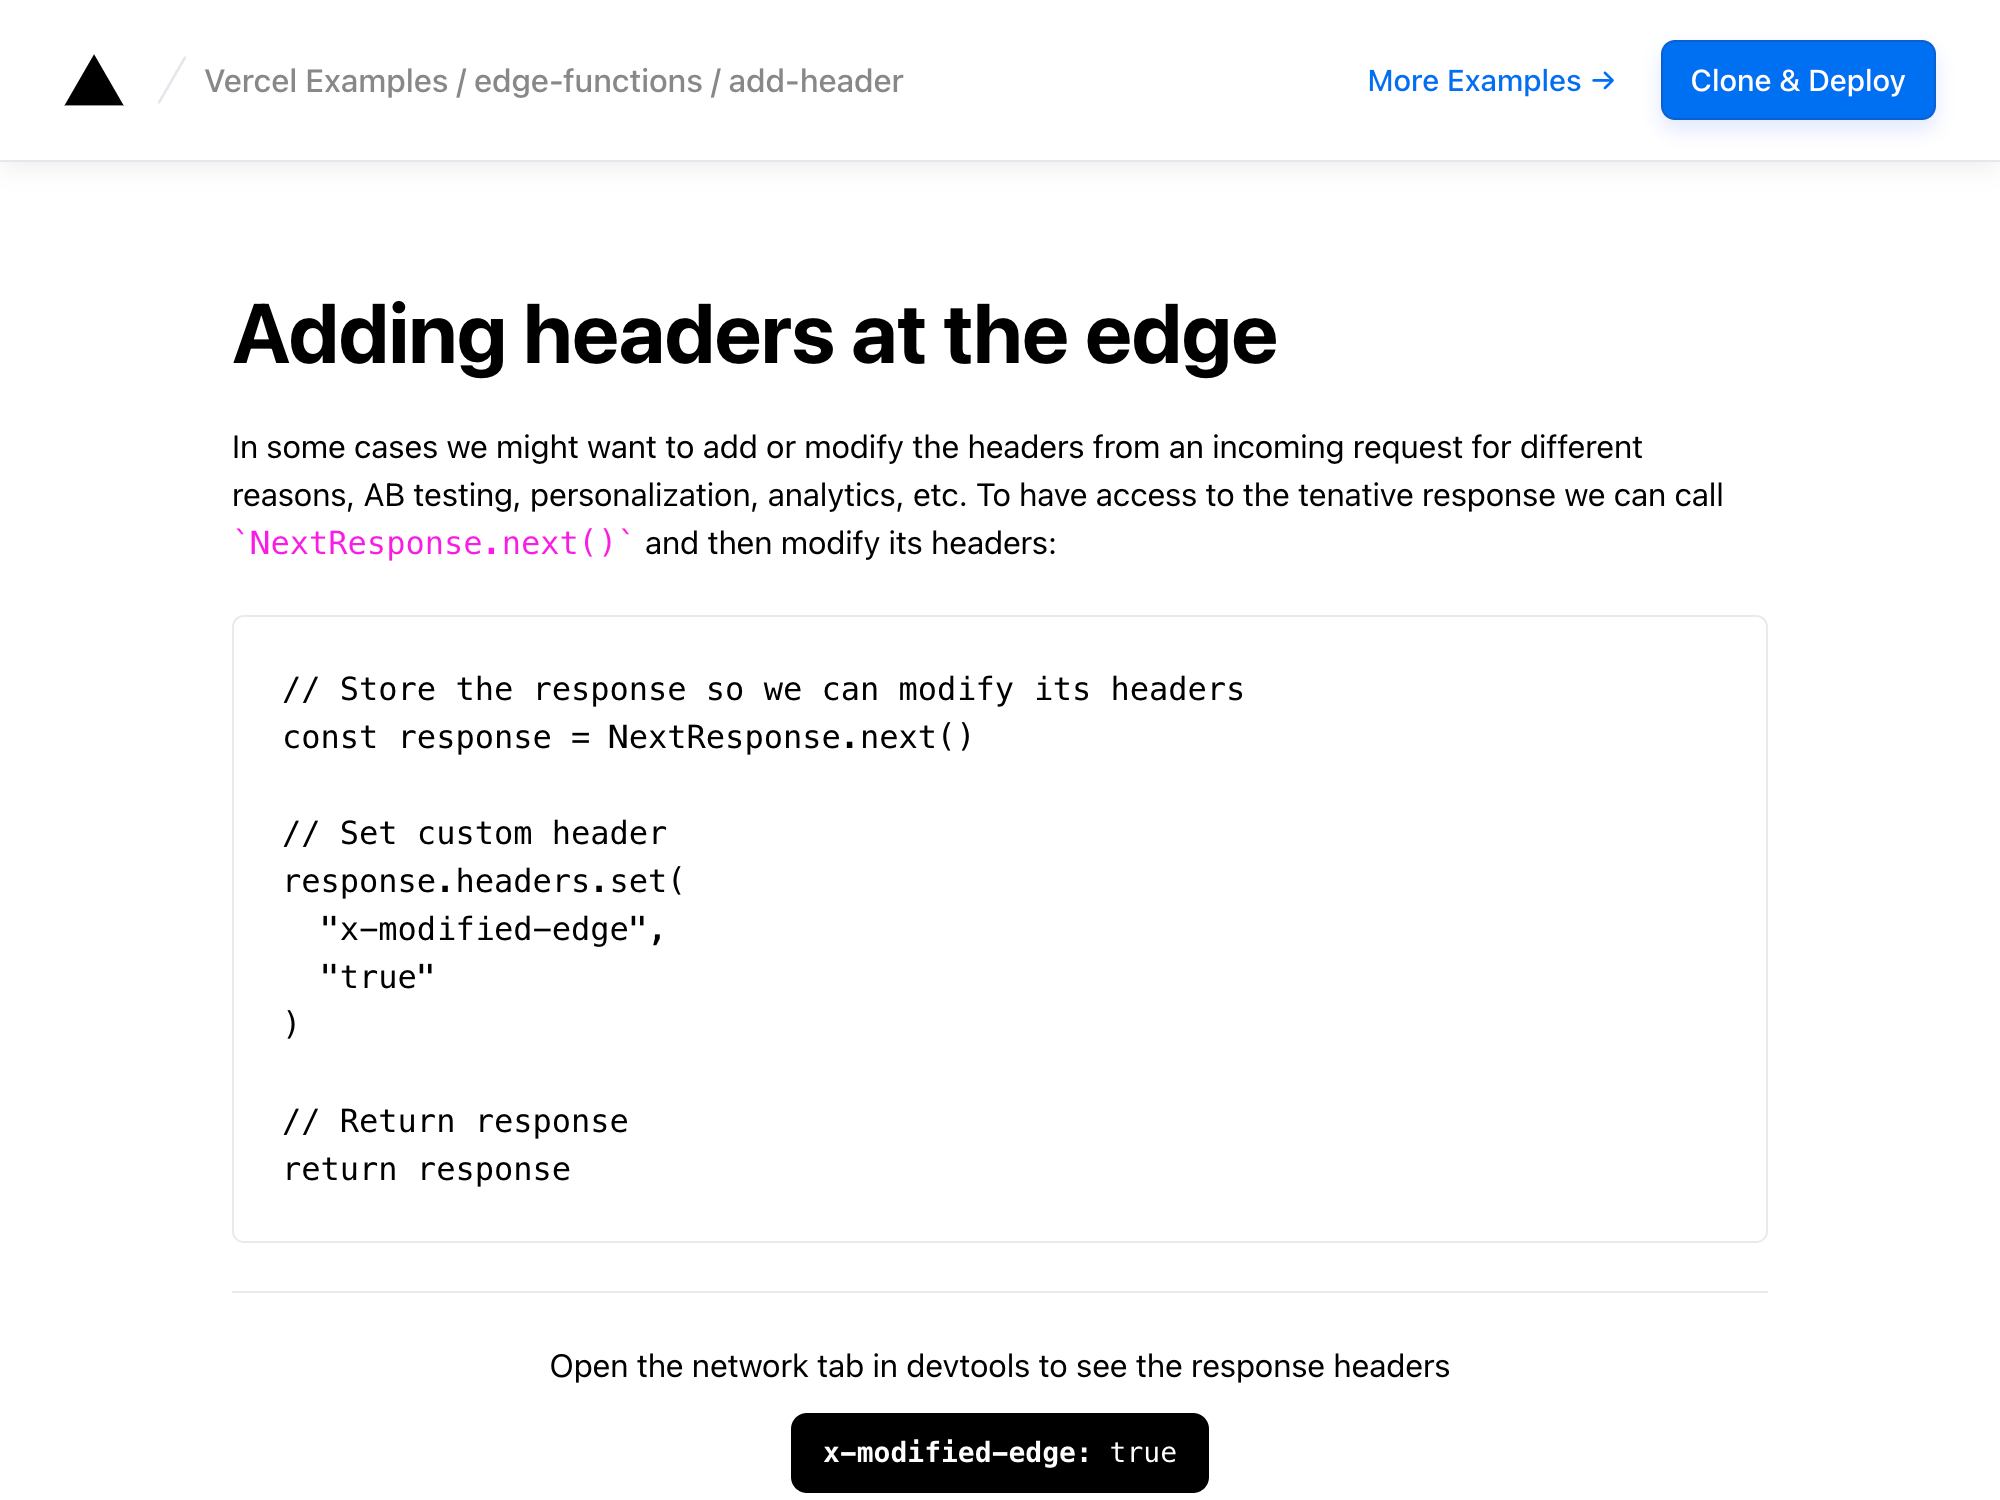 Adding Response Headers in Edge Functions